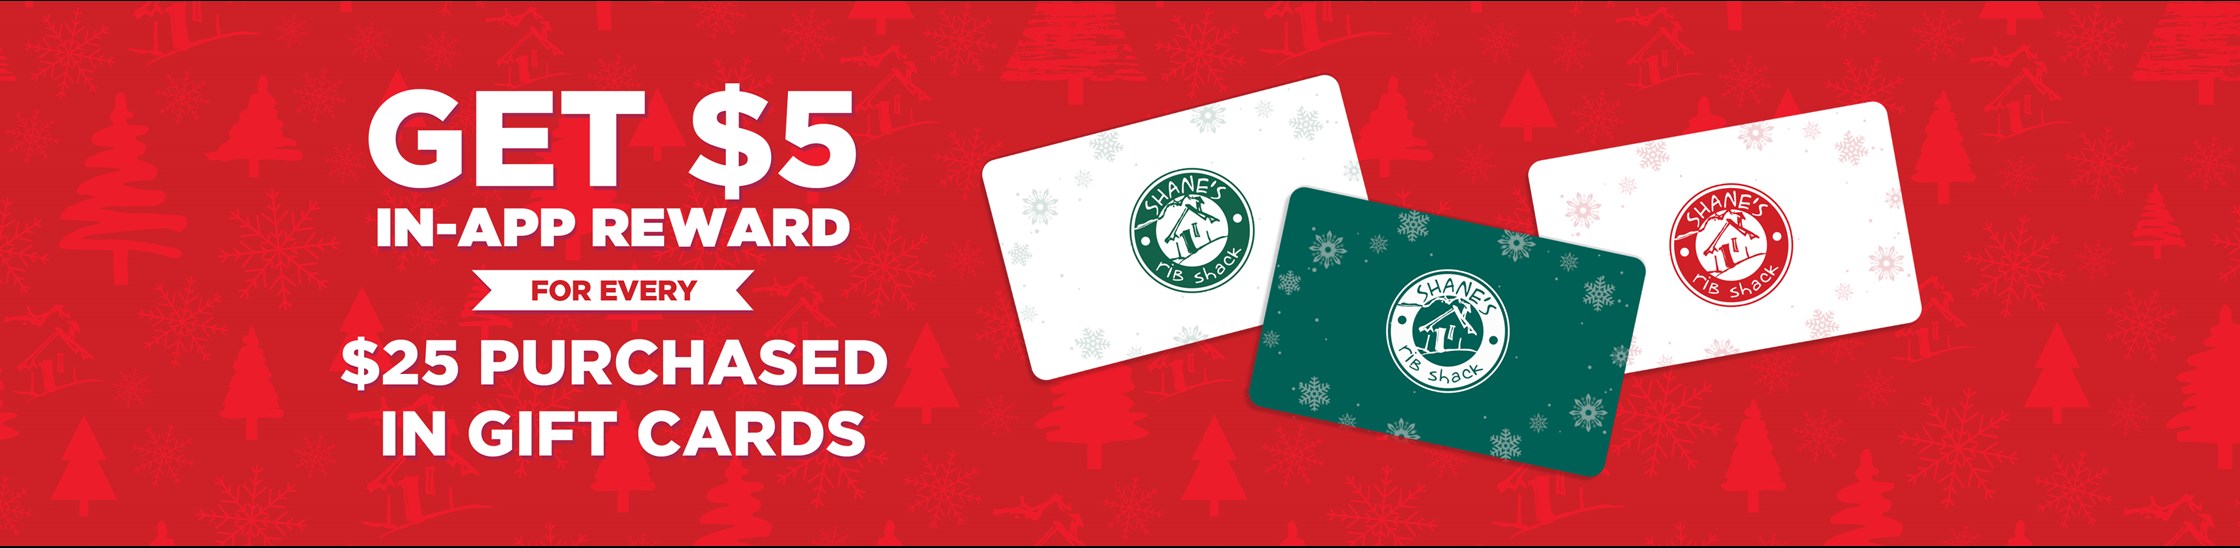 Get $5 in-app rewards for every $25 purchased in Gift Cards